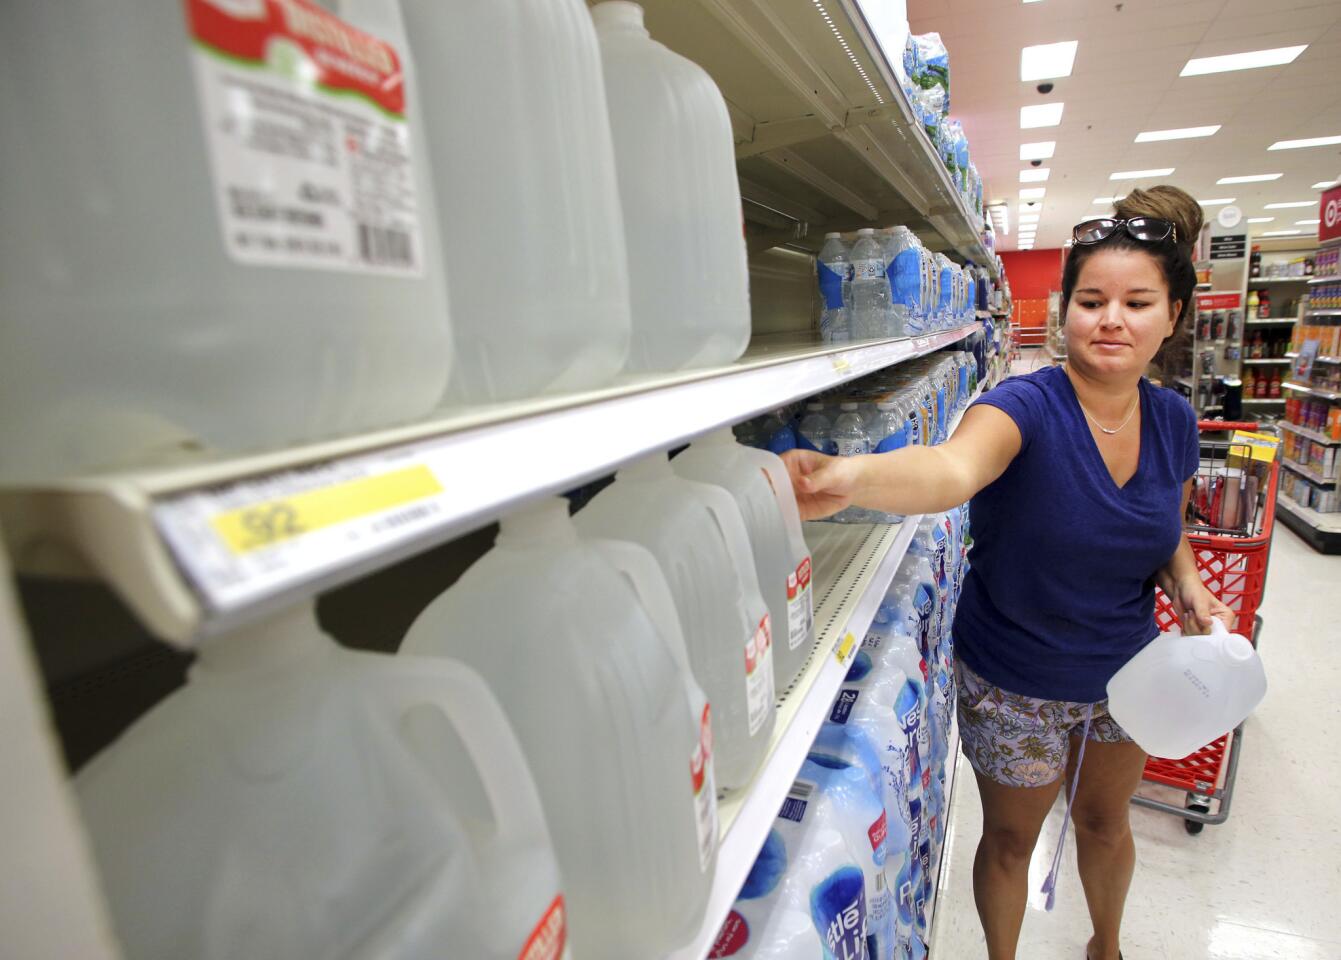 Kelby Schweickerrt, of Destin, Fla., grabs some gallon jugs of drinking water from the shelves at the Target store in Destin on Sept. 5, 2017.